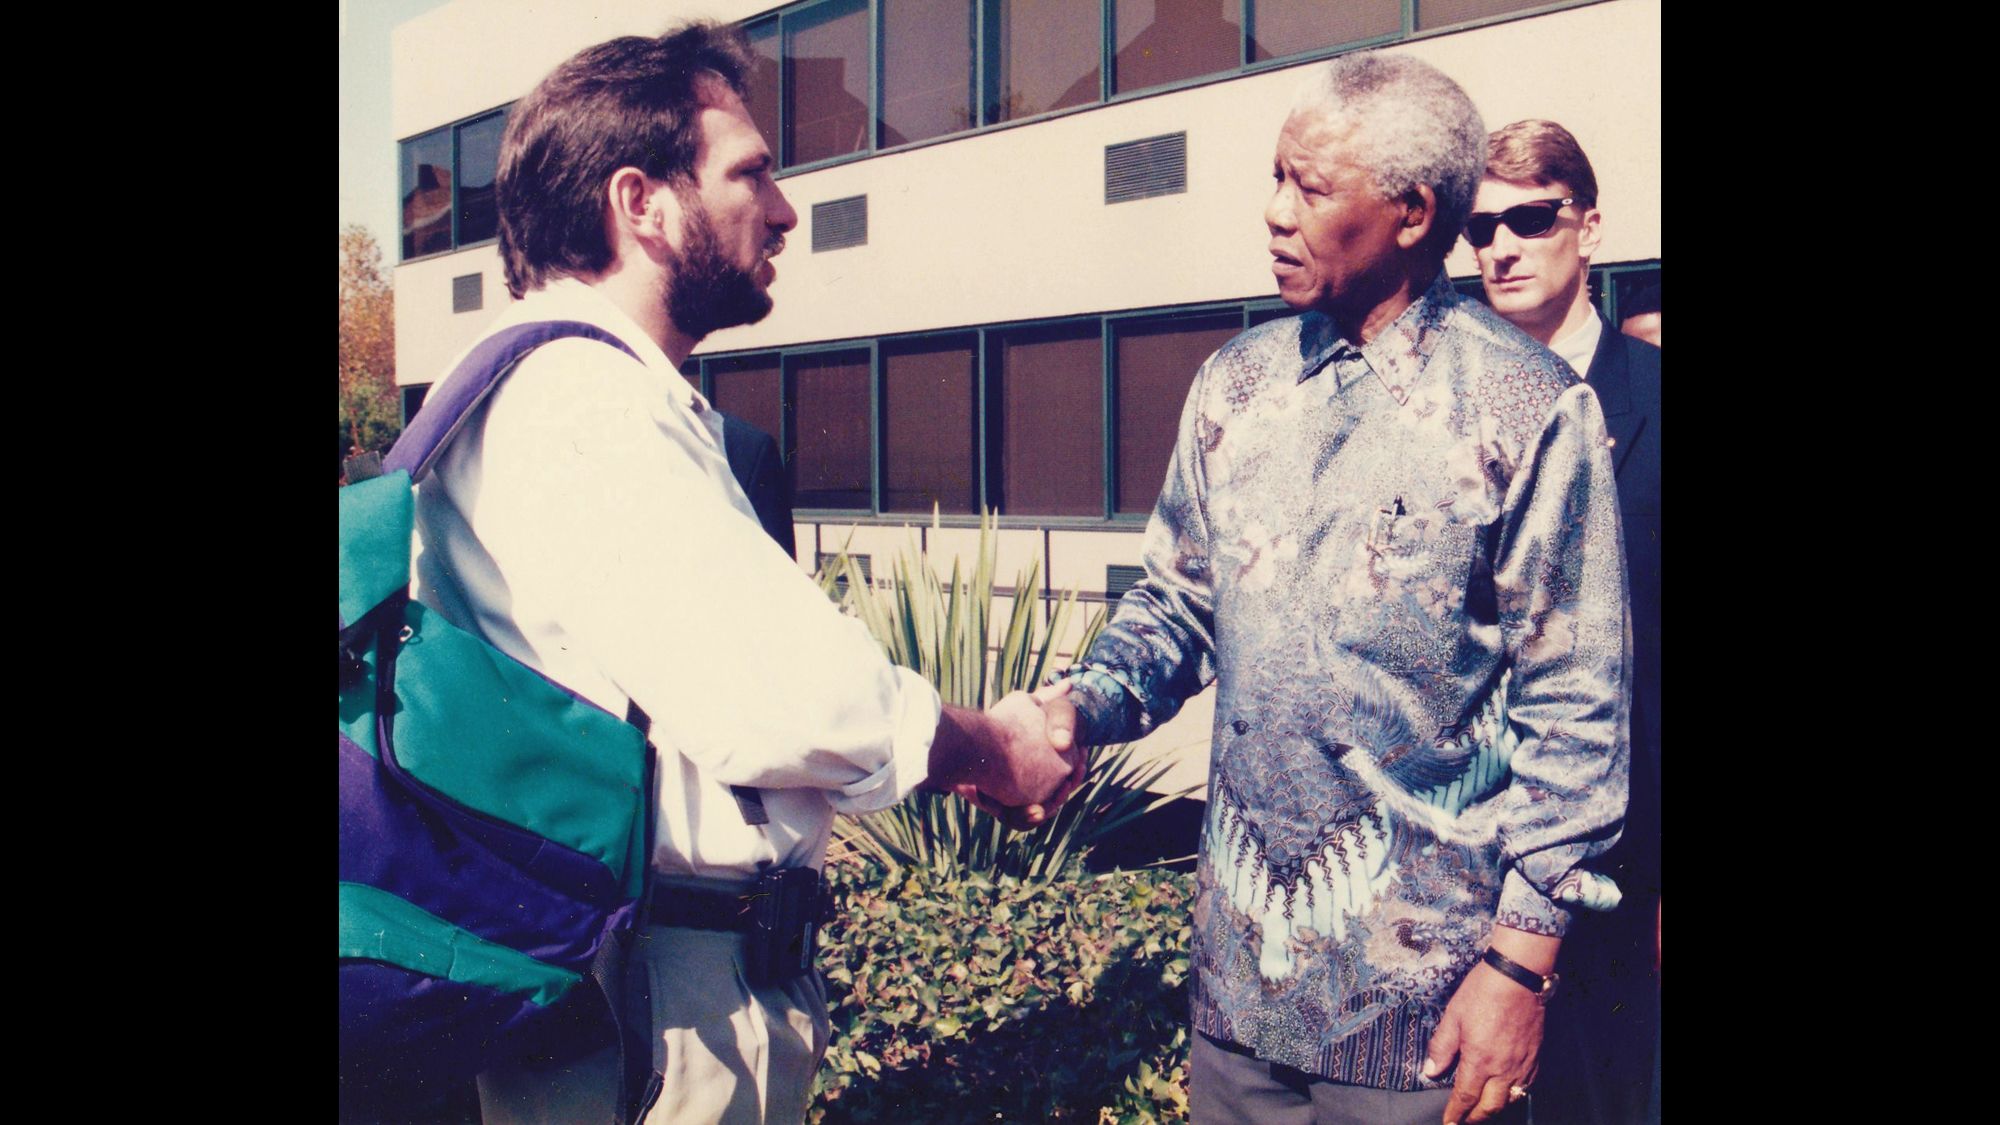 South African President Nelson Mandela shakes hands in 1998 with Tom Cohen, who was leaving South Africa after eight years as an Associated Press correspondent covering the nation's transition from apartheid to a multiracial democracy.